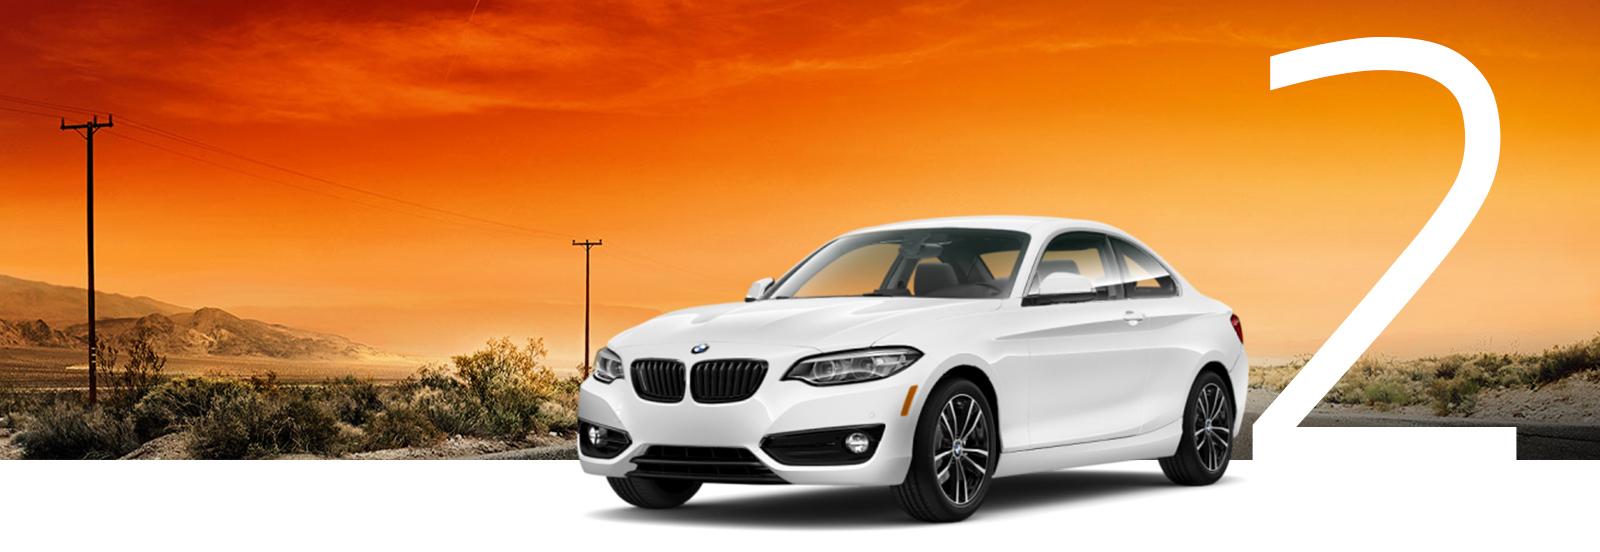 A white BMW 2 Series with a desert highway background.